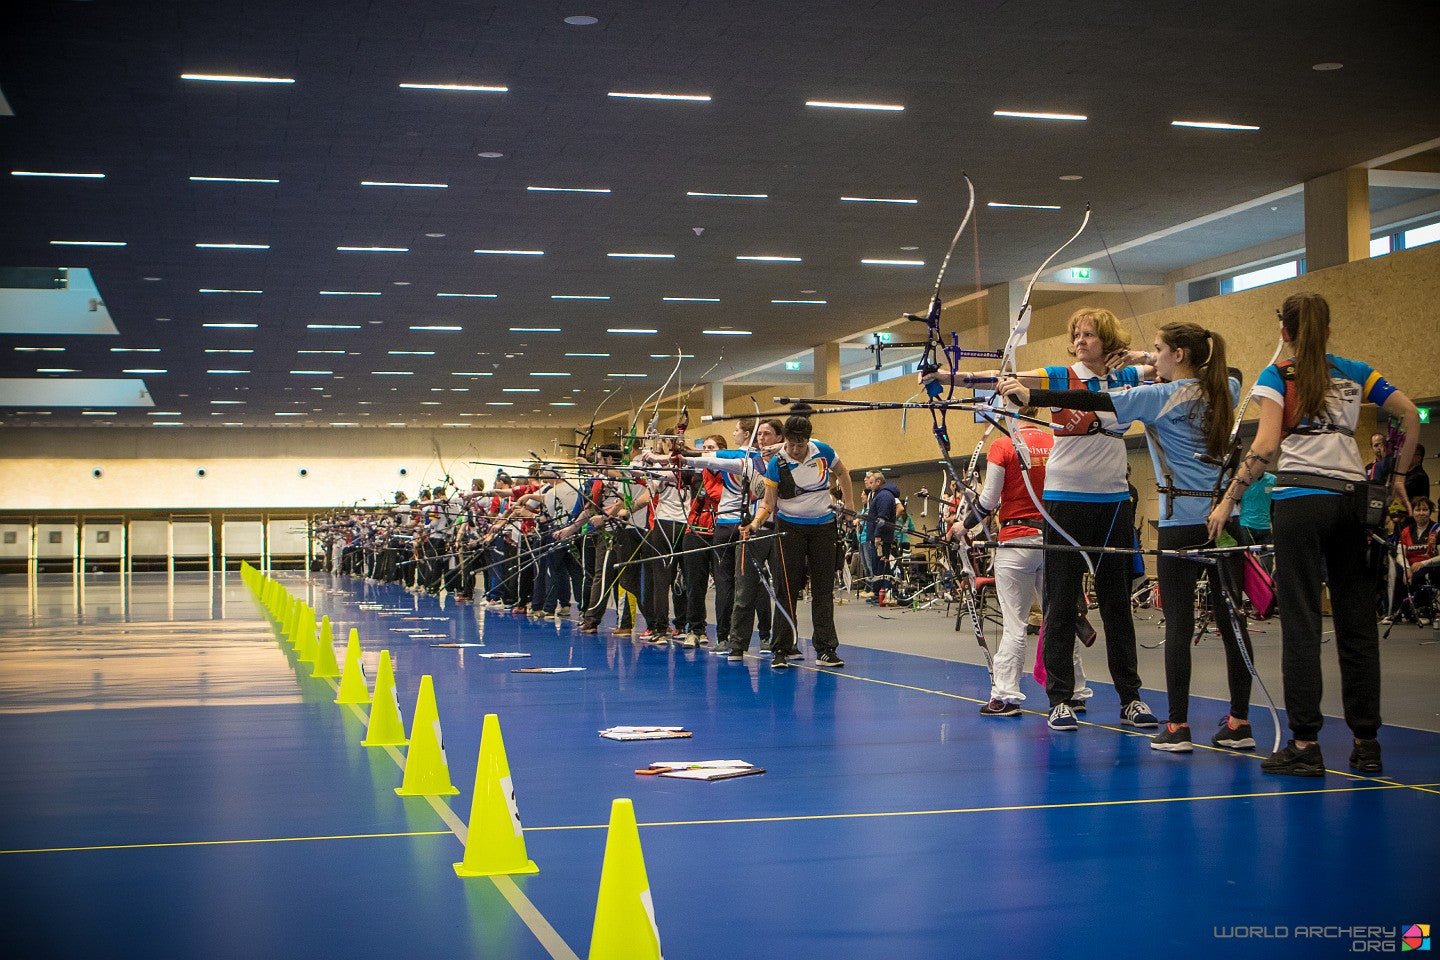 Archery's new State-of-the-art Facility